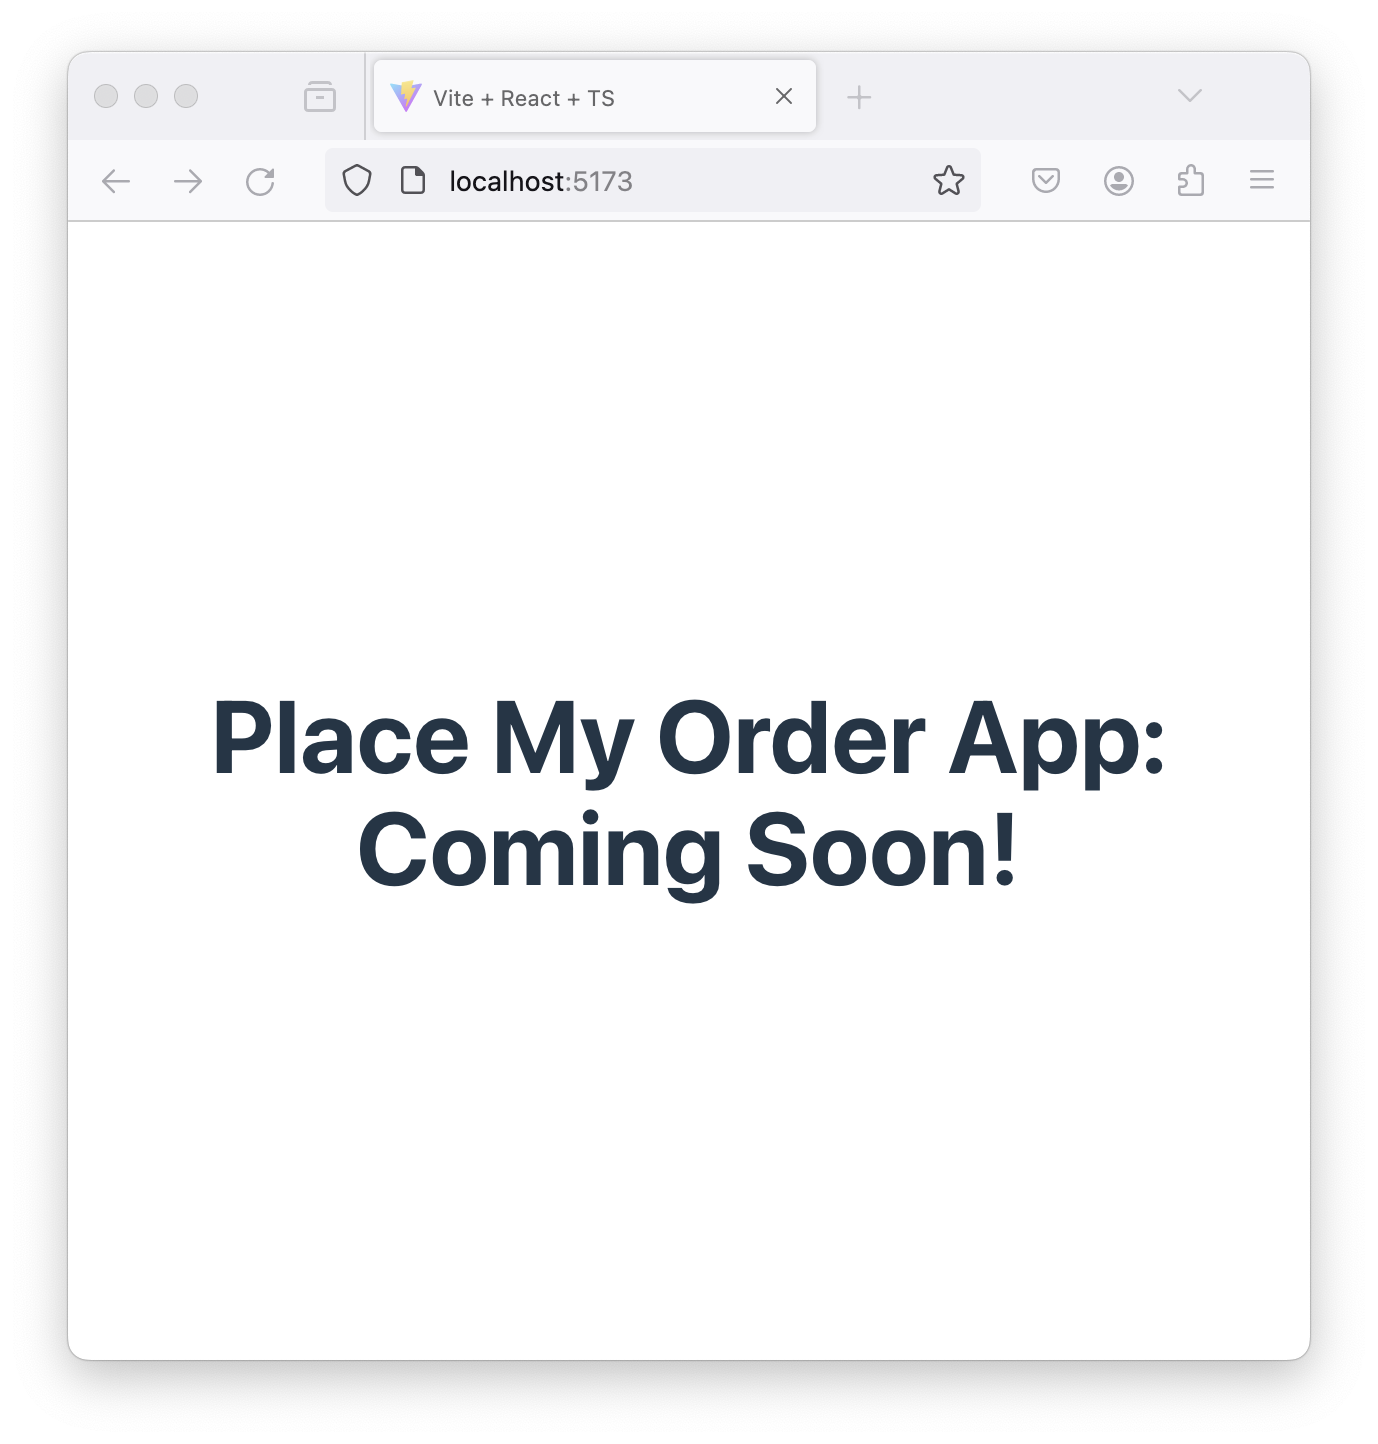 A web browser displaying the root page of the newly created application served by the dev server. The page displays a single level 1 heading with the text 'Place My Order App: Coming Soon!'